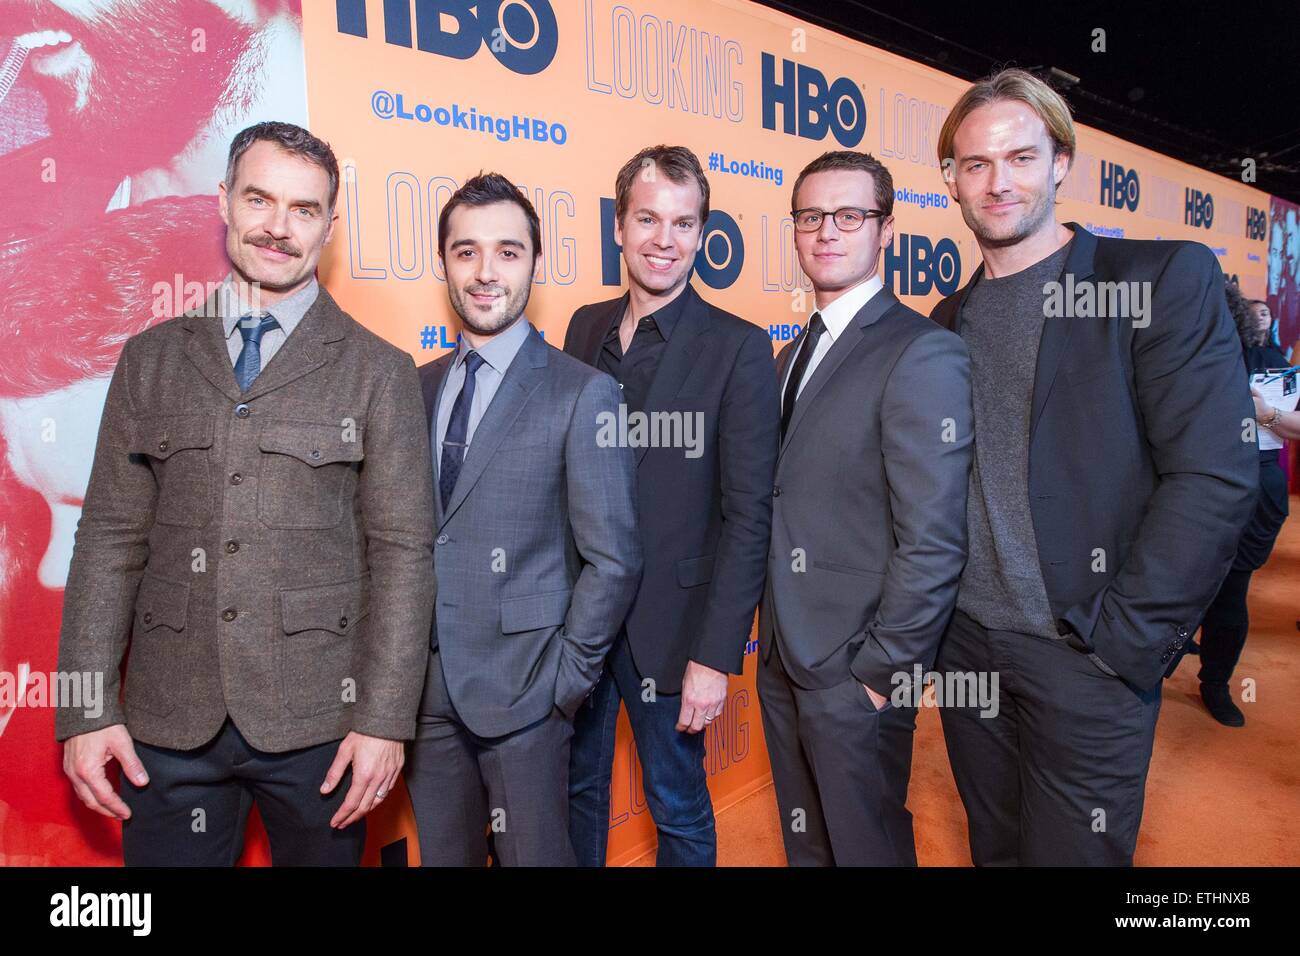 HBO presents the world premiere of ‘Looking' - Arrivals  Featuring: Murray Bartlett, Frankie J. Alvarez, Casey Bloys, Jonathan Groff, Nick Hall Where: San Francisco, California, United States When: 07 Jan 2015 Credit: Drew Altizer/WENN.com Stock Photo